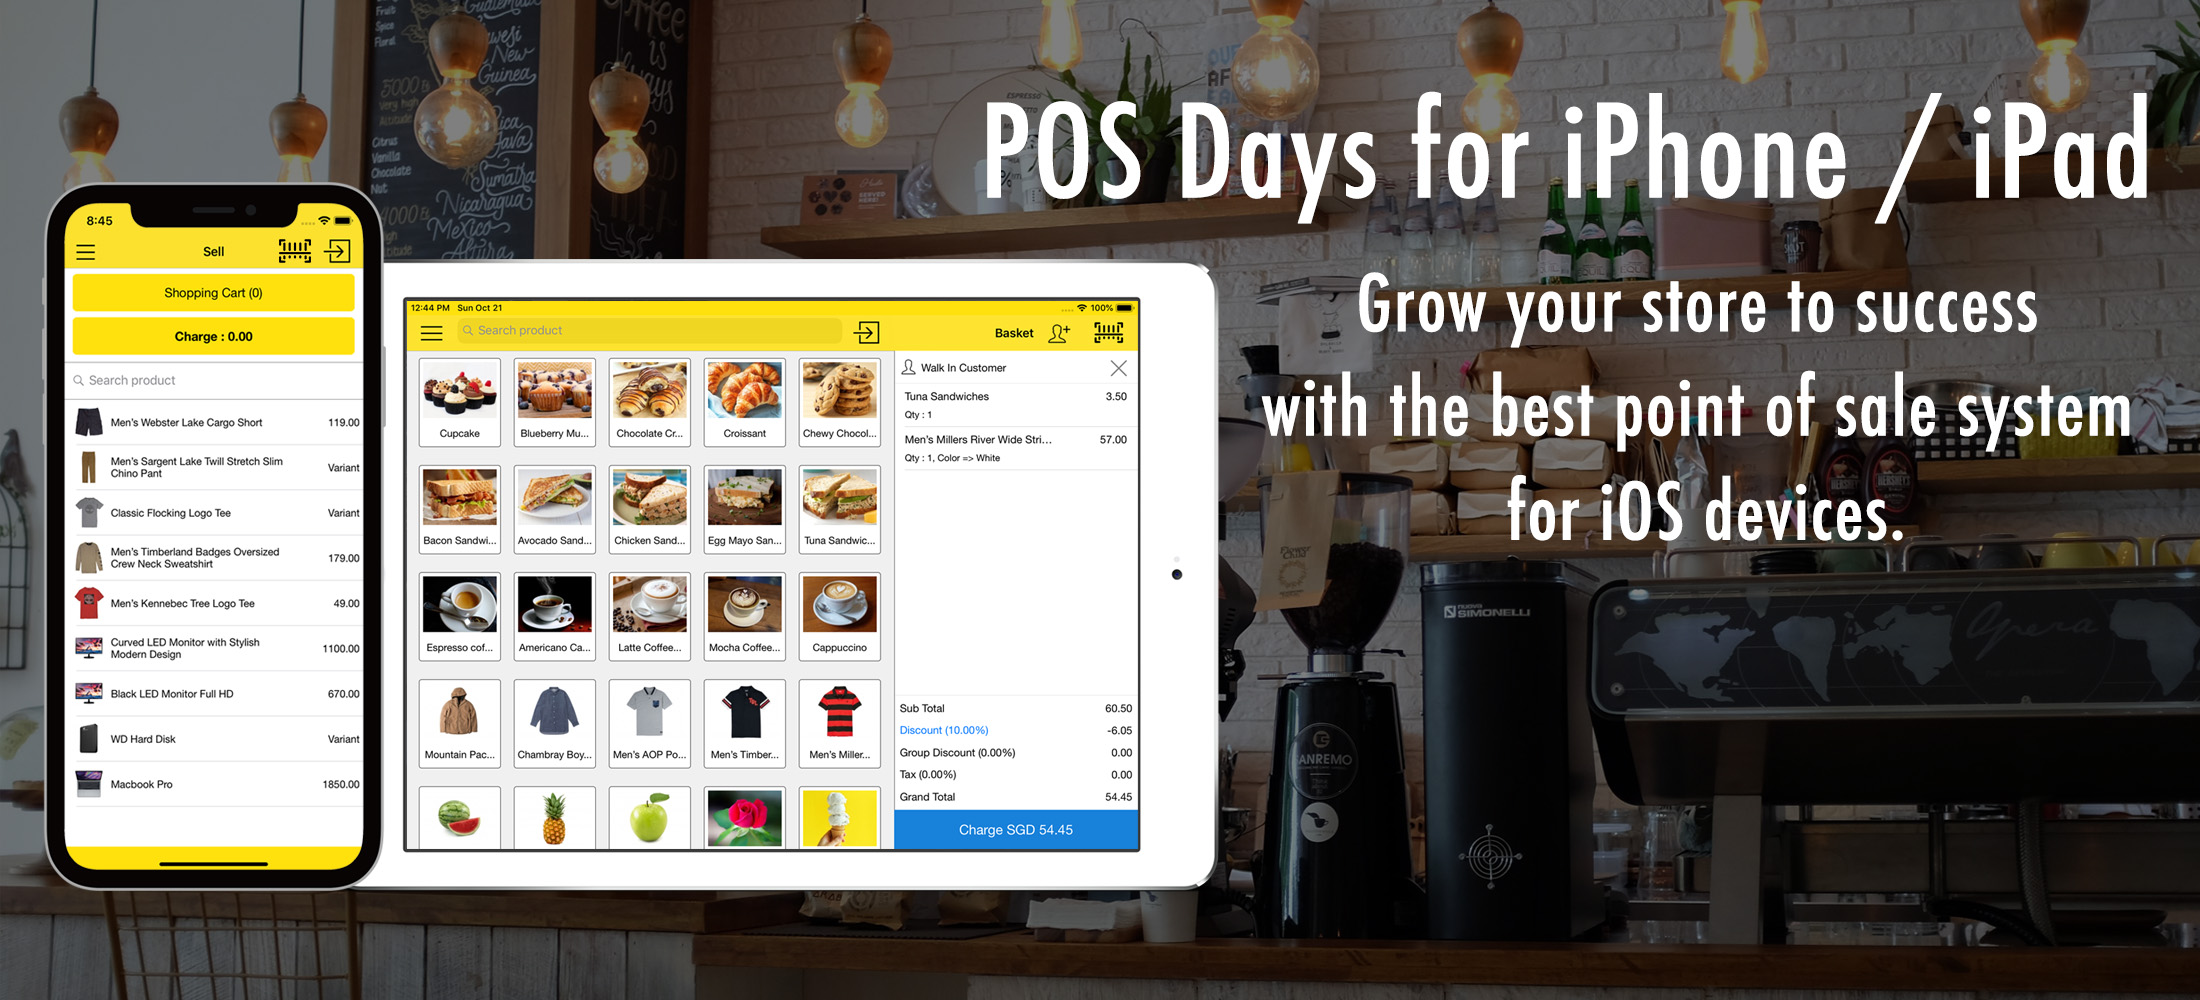 download the new version for ios Photo Pos Pro 4.04.35 Premium